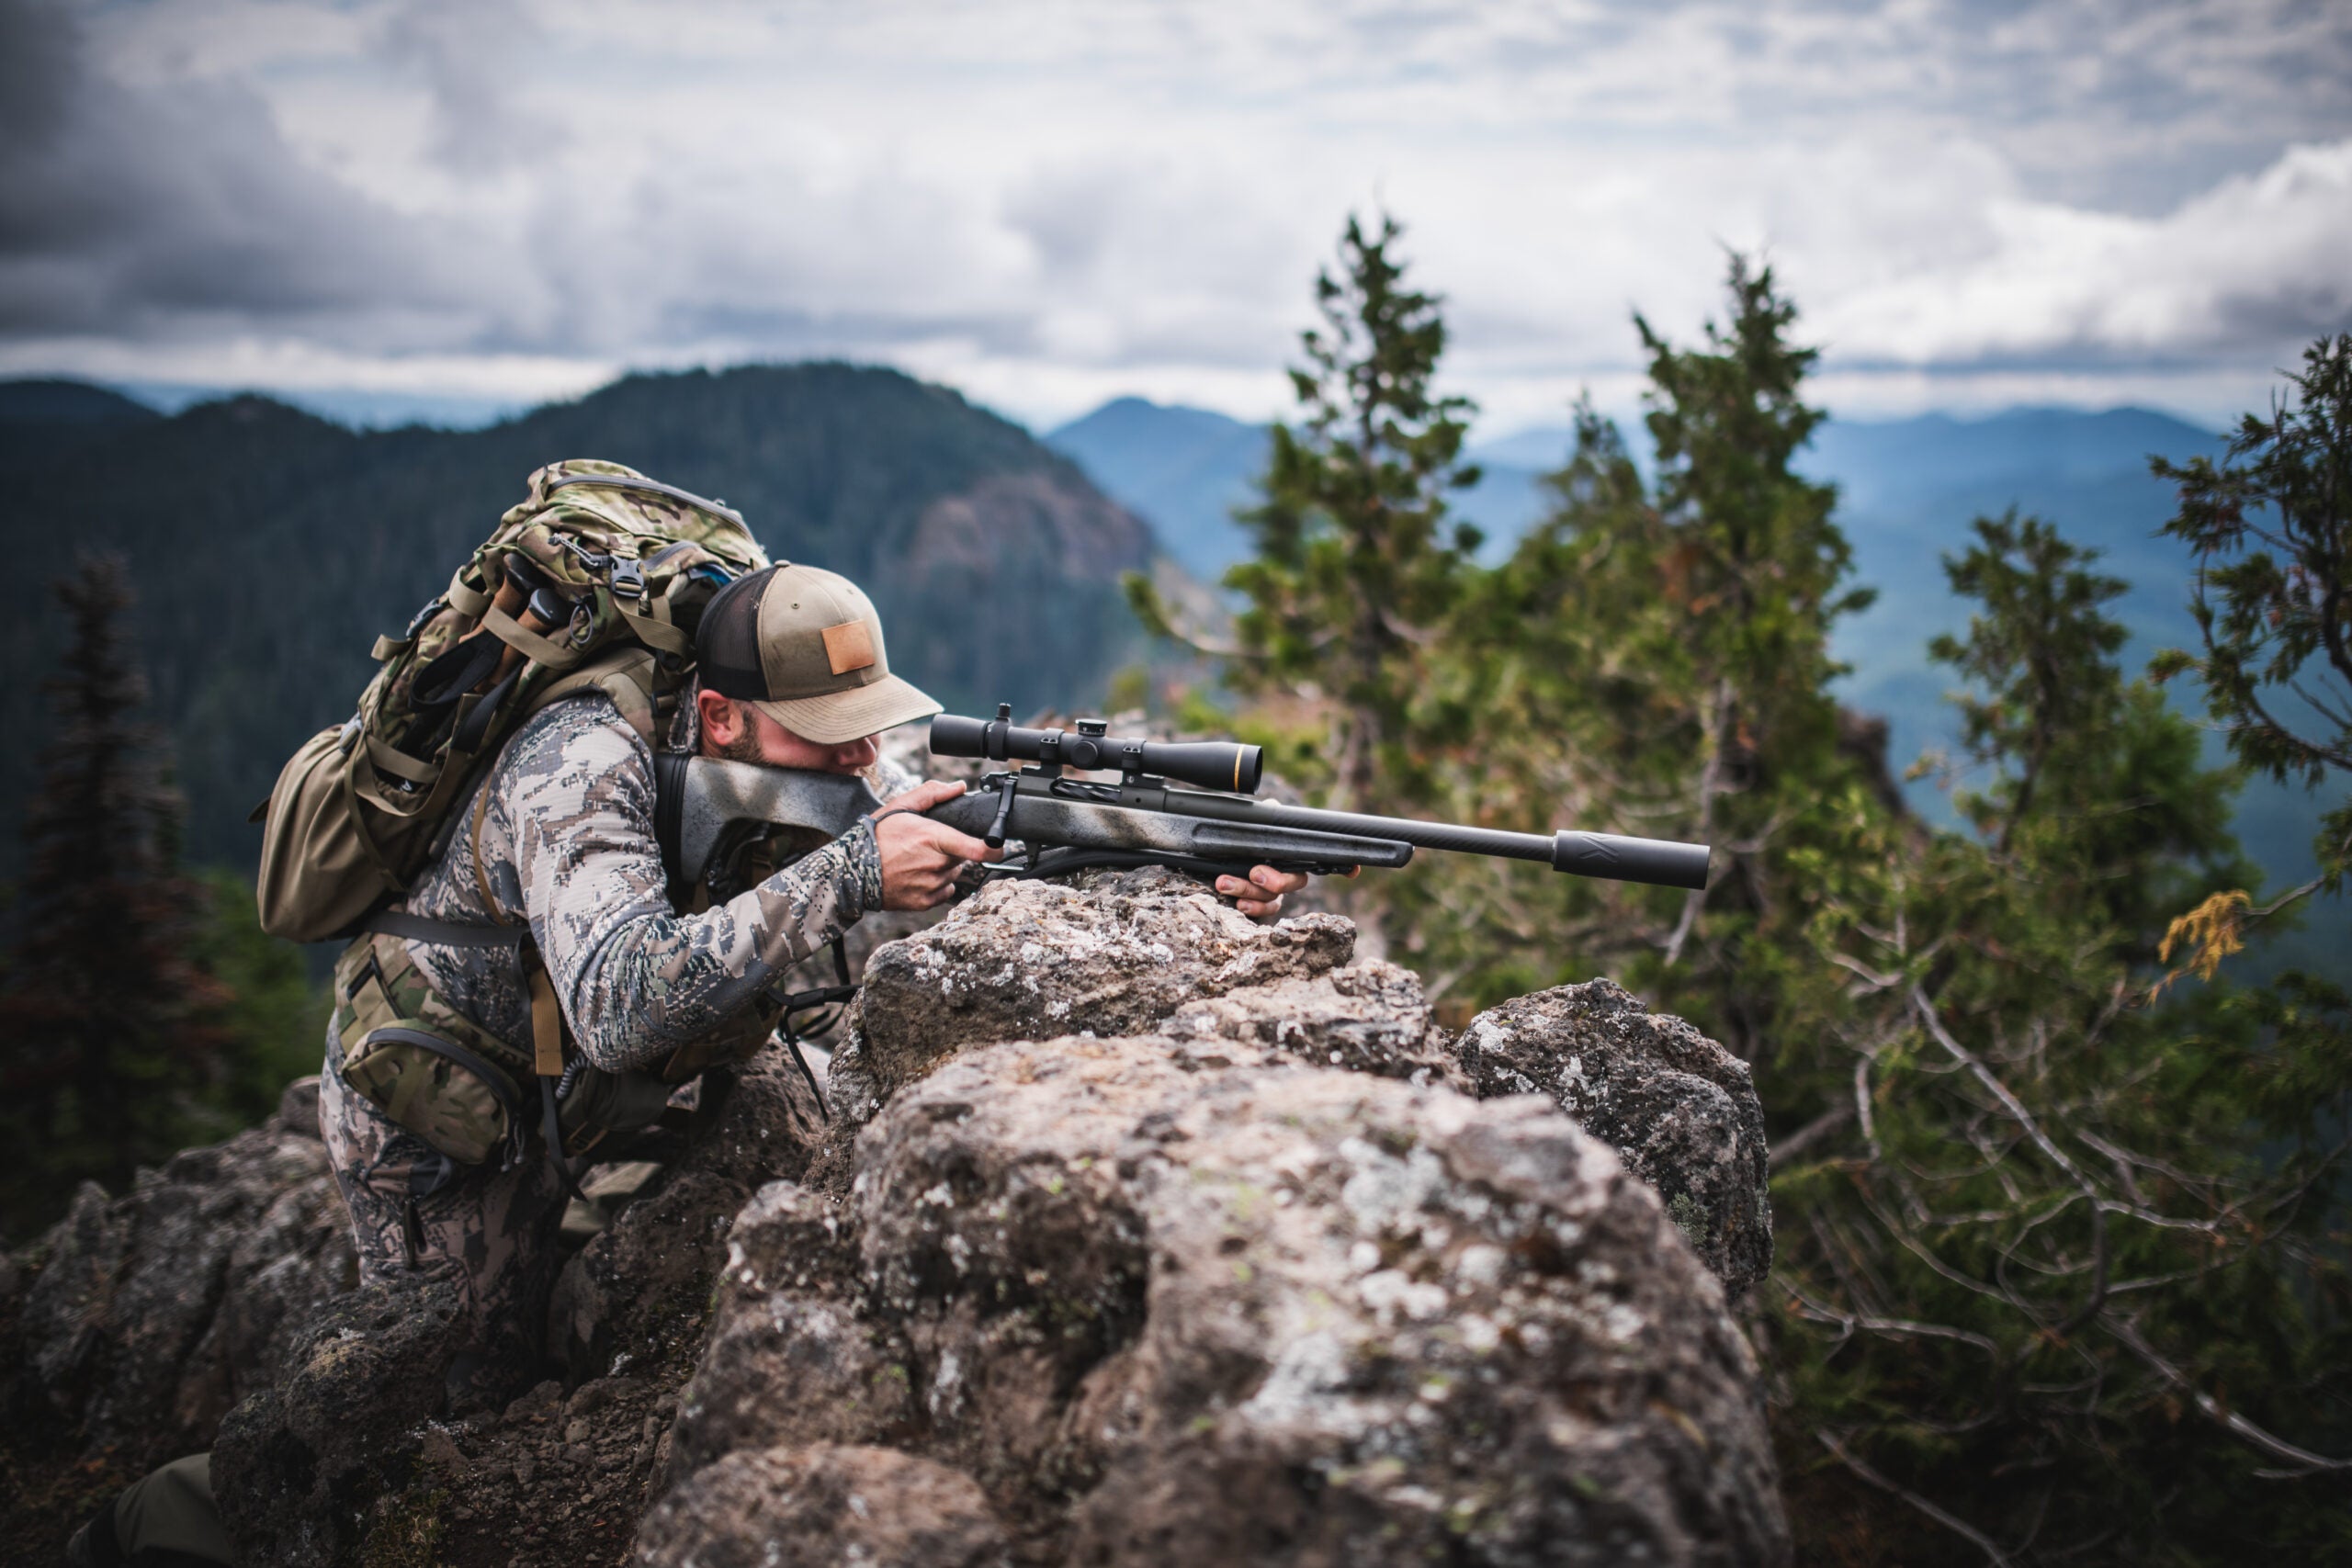 a hunter in mountainous terrain shooting a rifle equipped with a silencer or suppressor